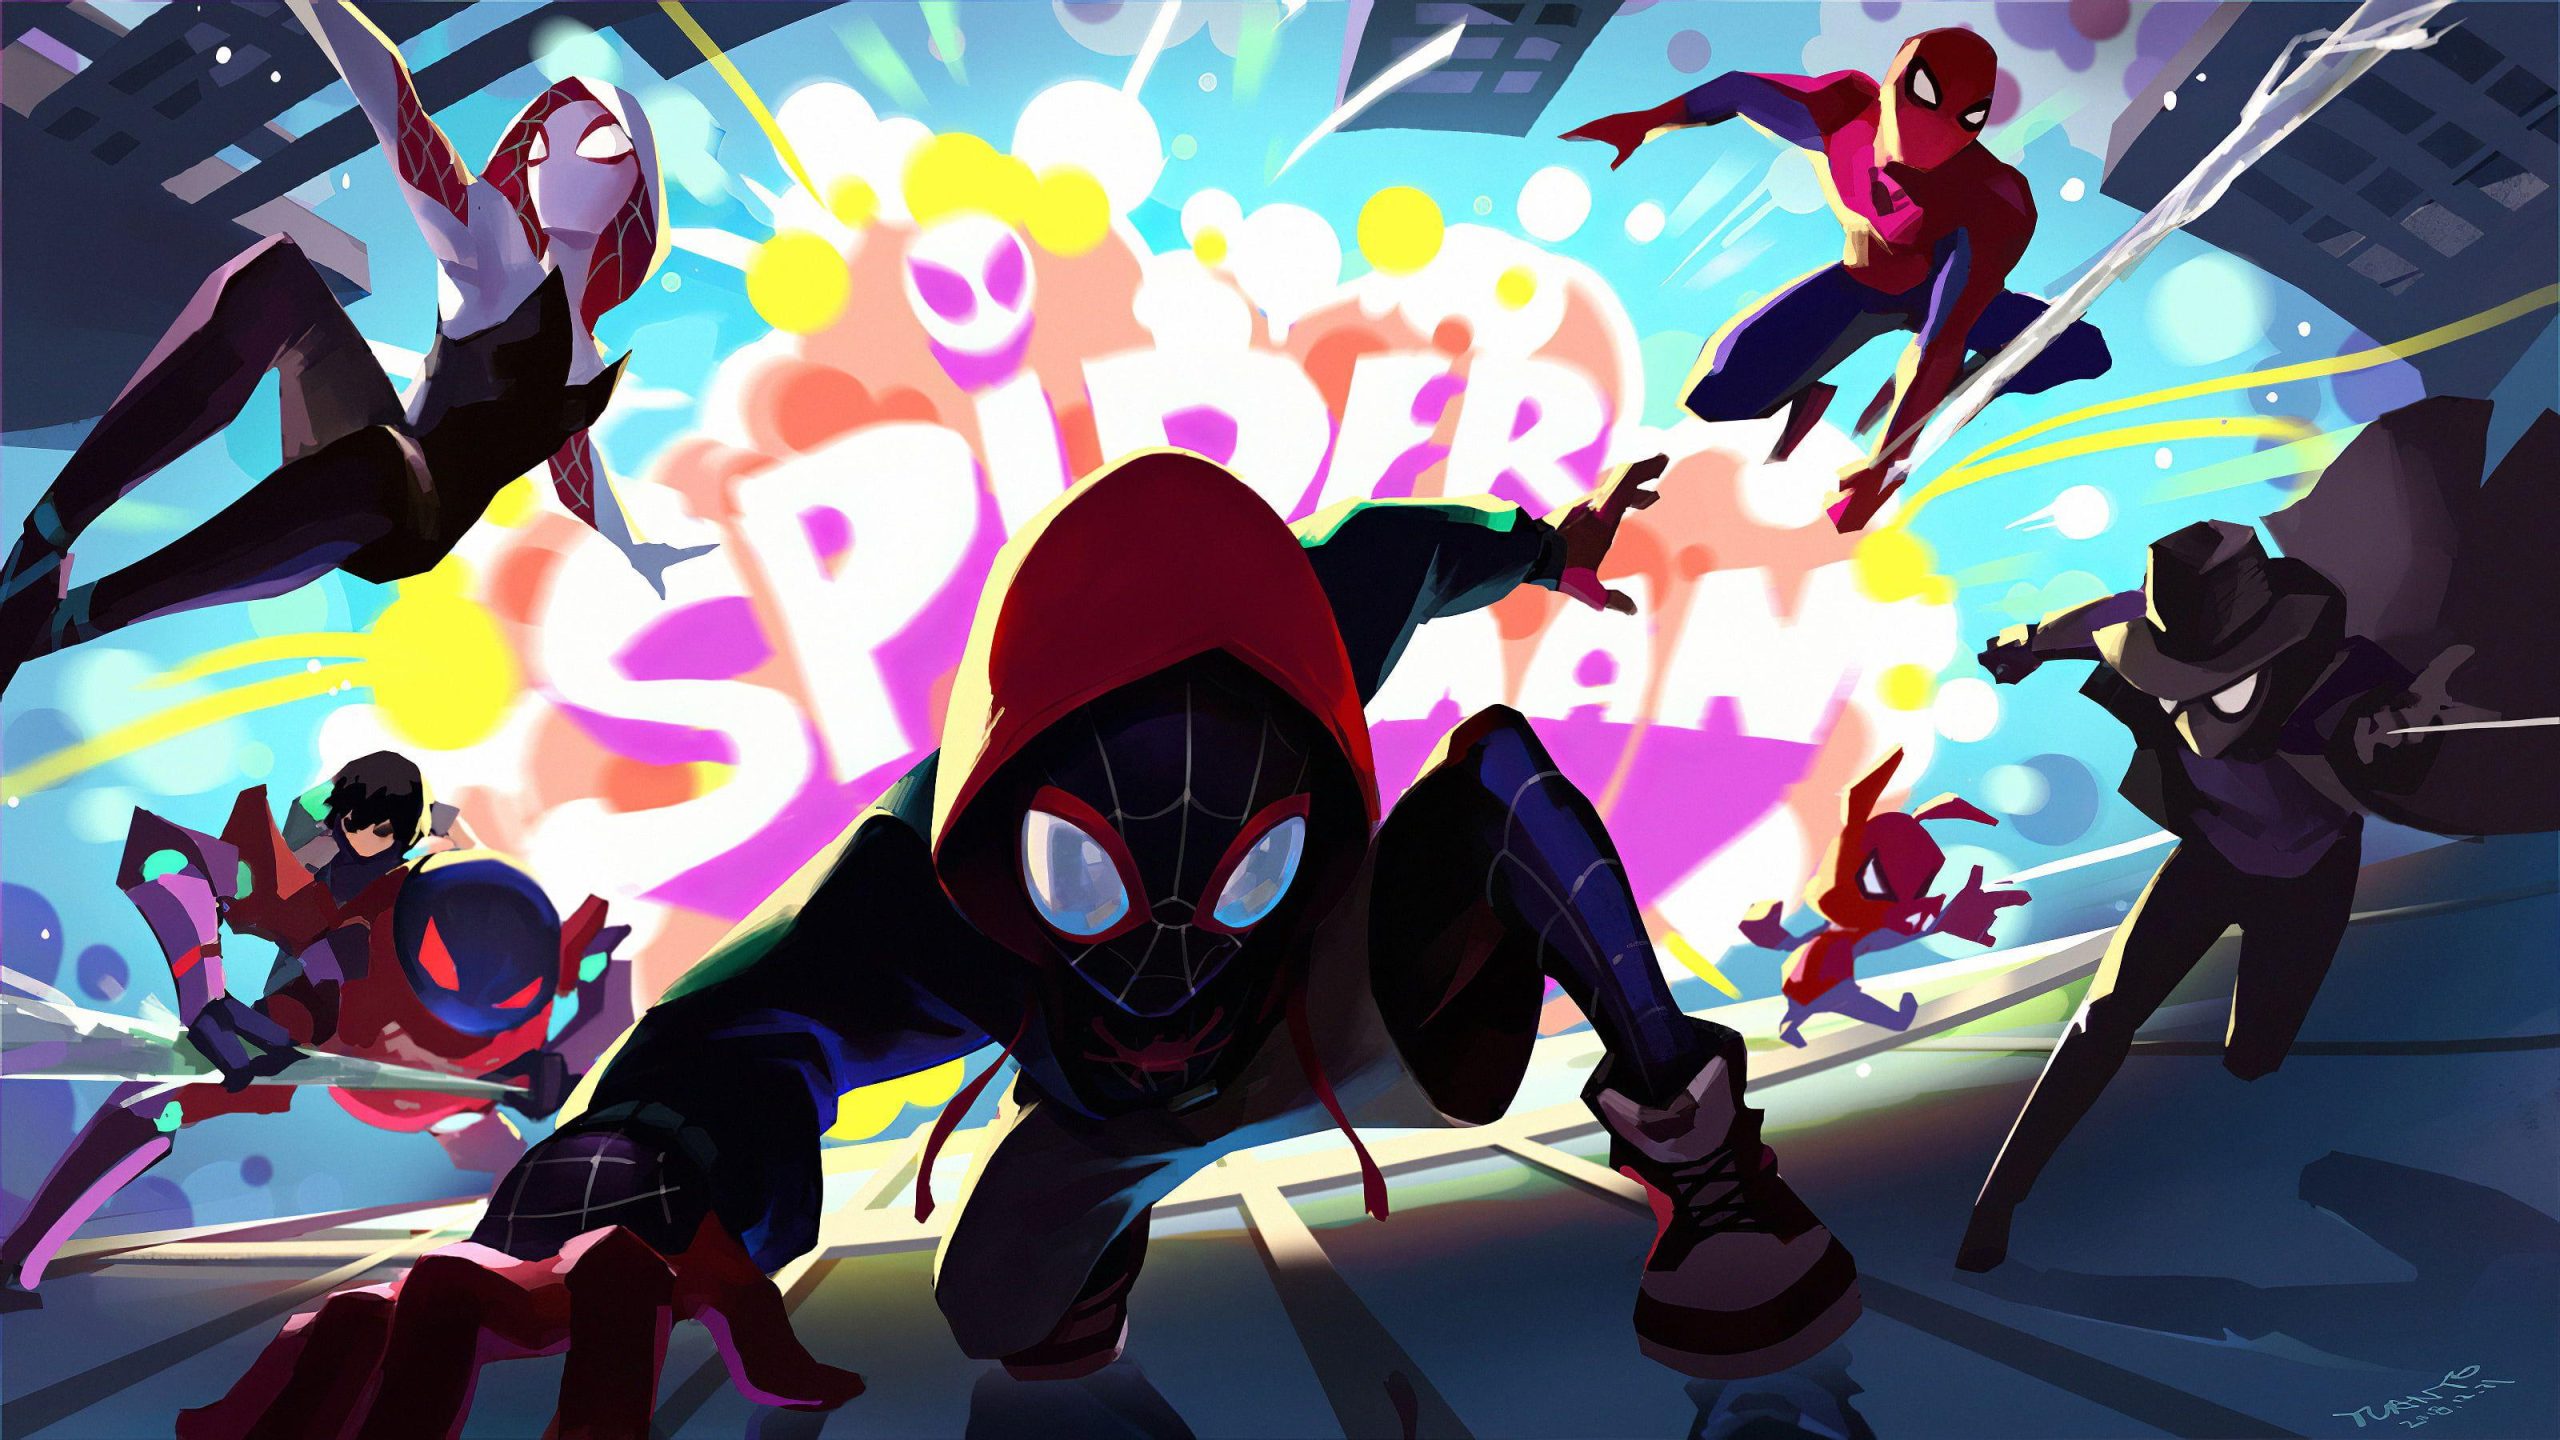 Miles Morales And Gwen Stacy 1080p Wallpaper, Miles Morales And Gwen Stacy, Movies